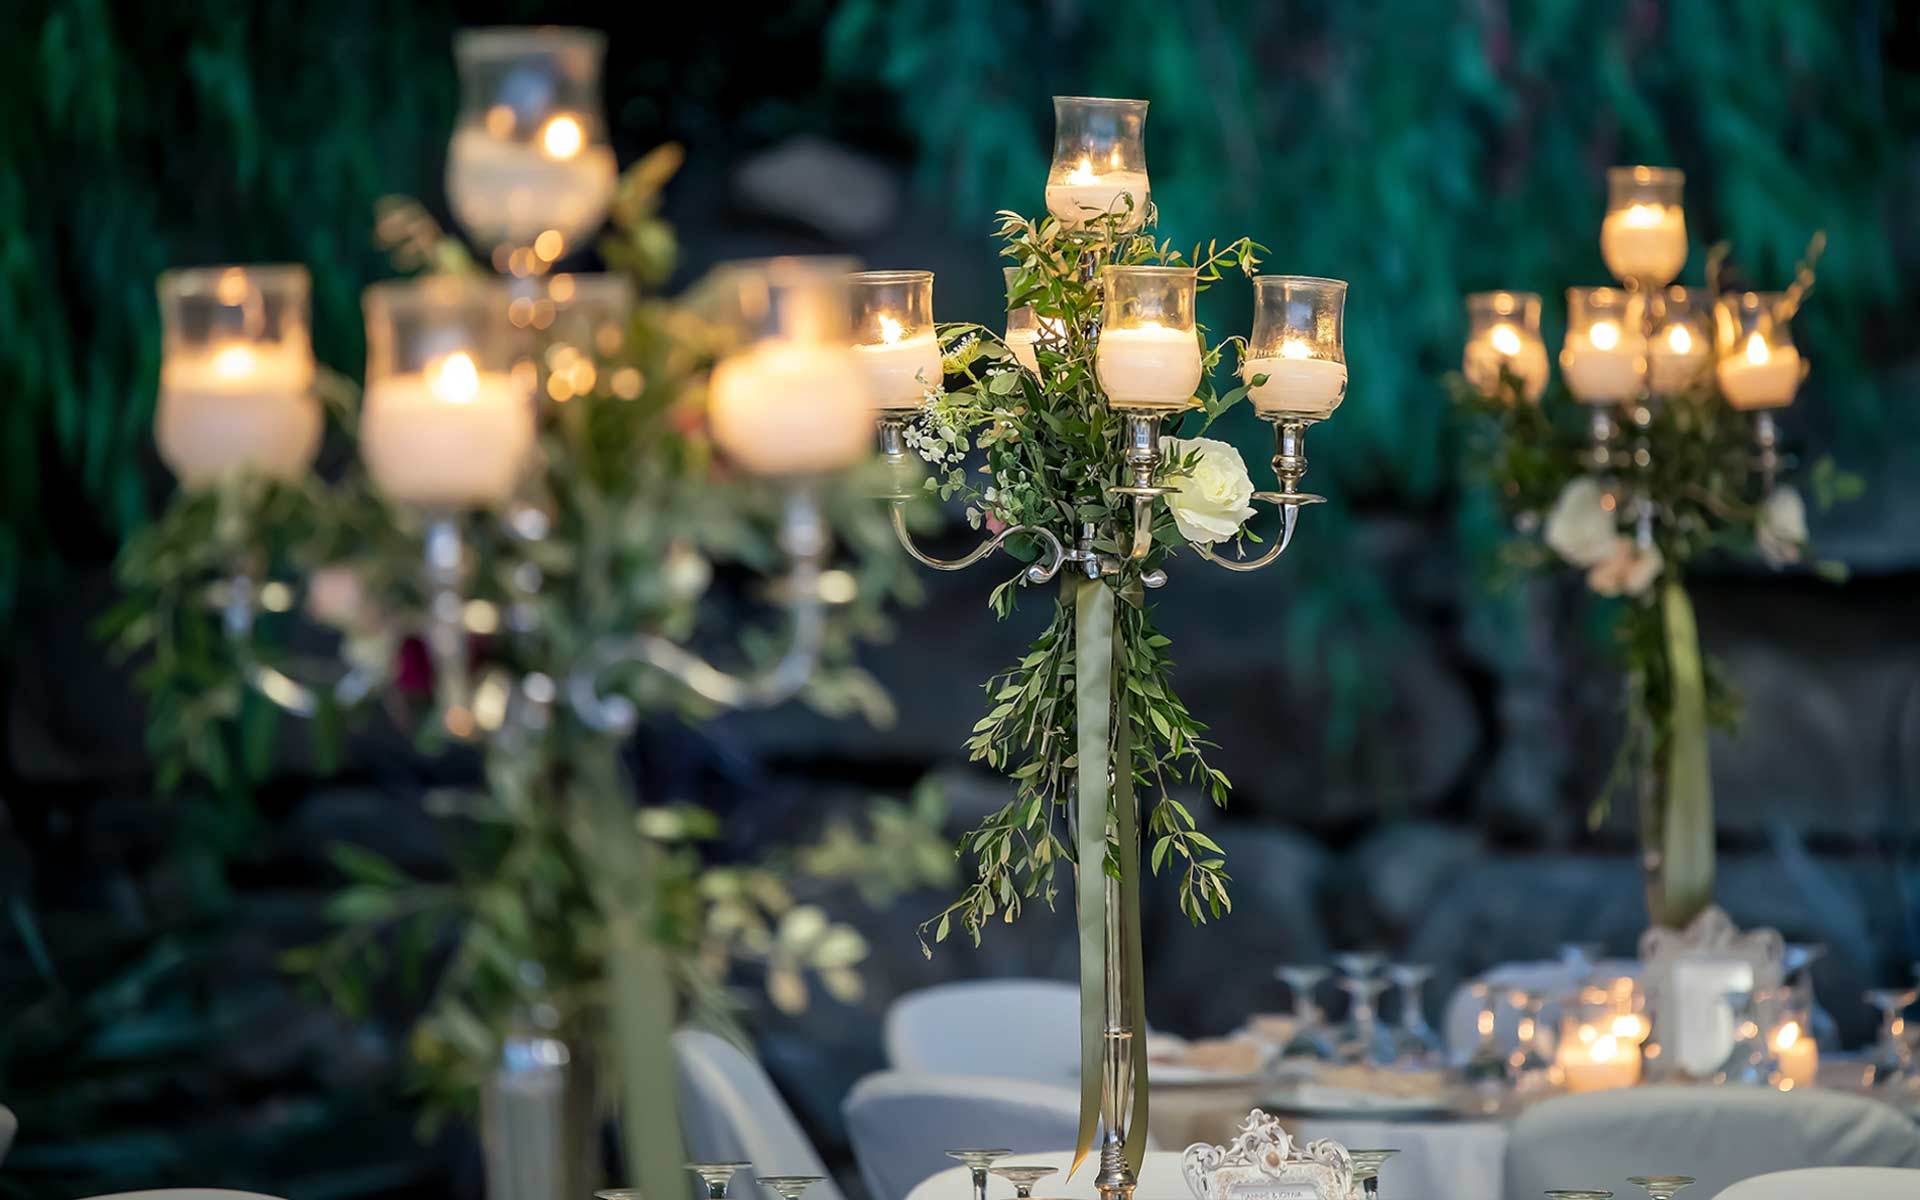 Rustic-wedding-table-decor-with-candelabras-with-olive-leaf-garland-roses-green-ribbons